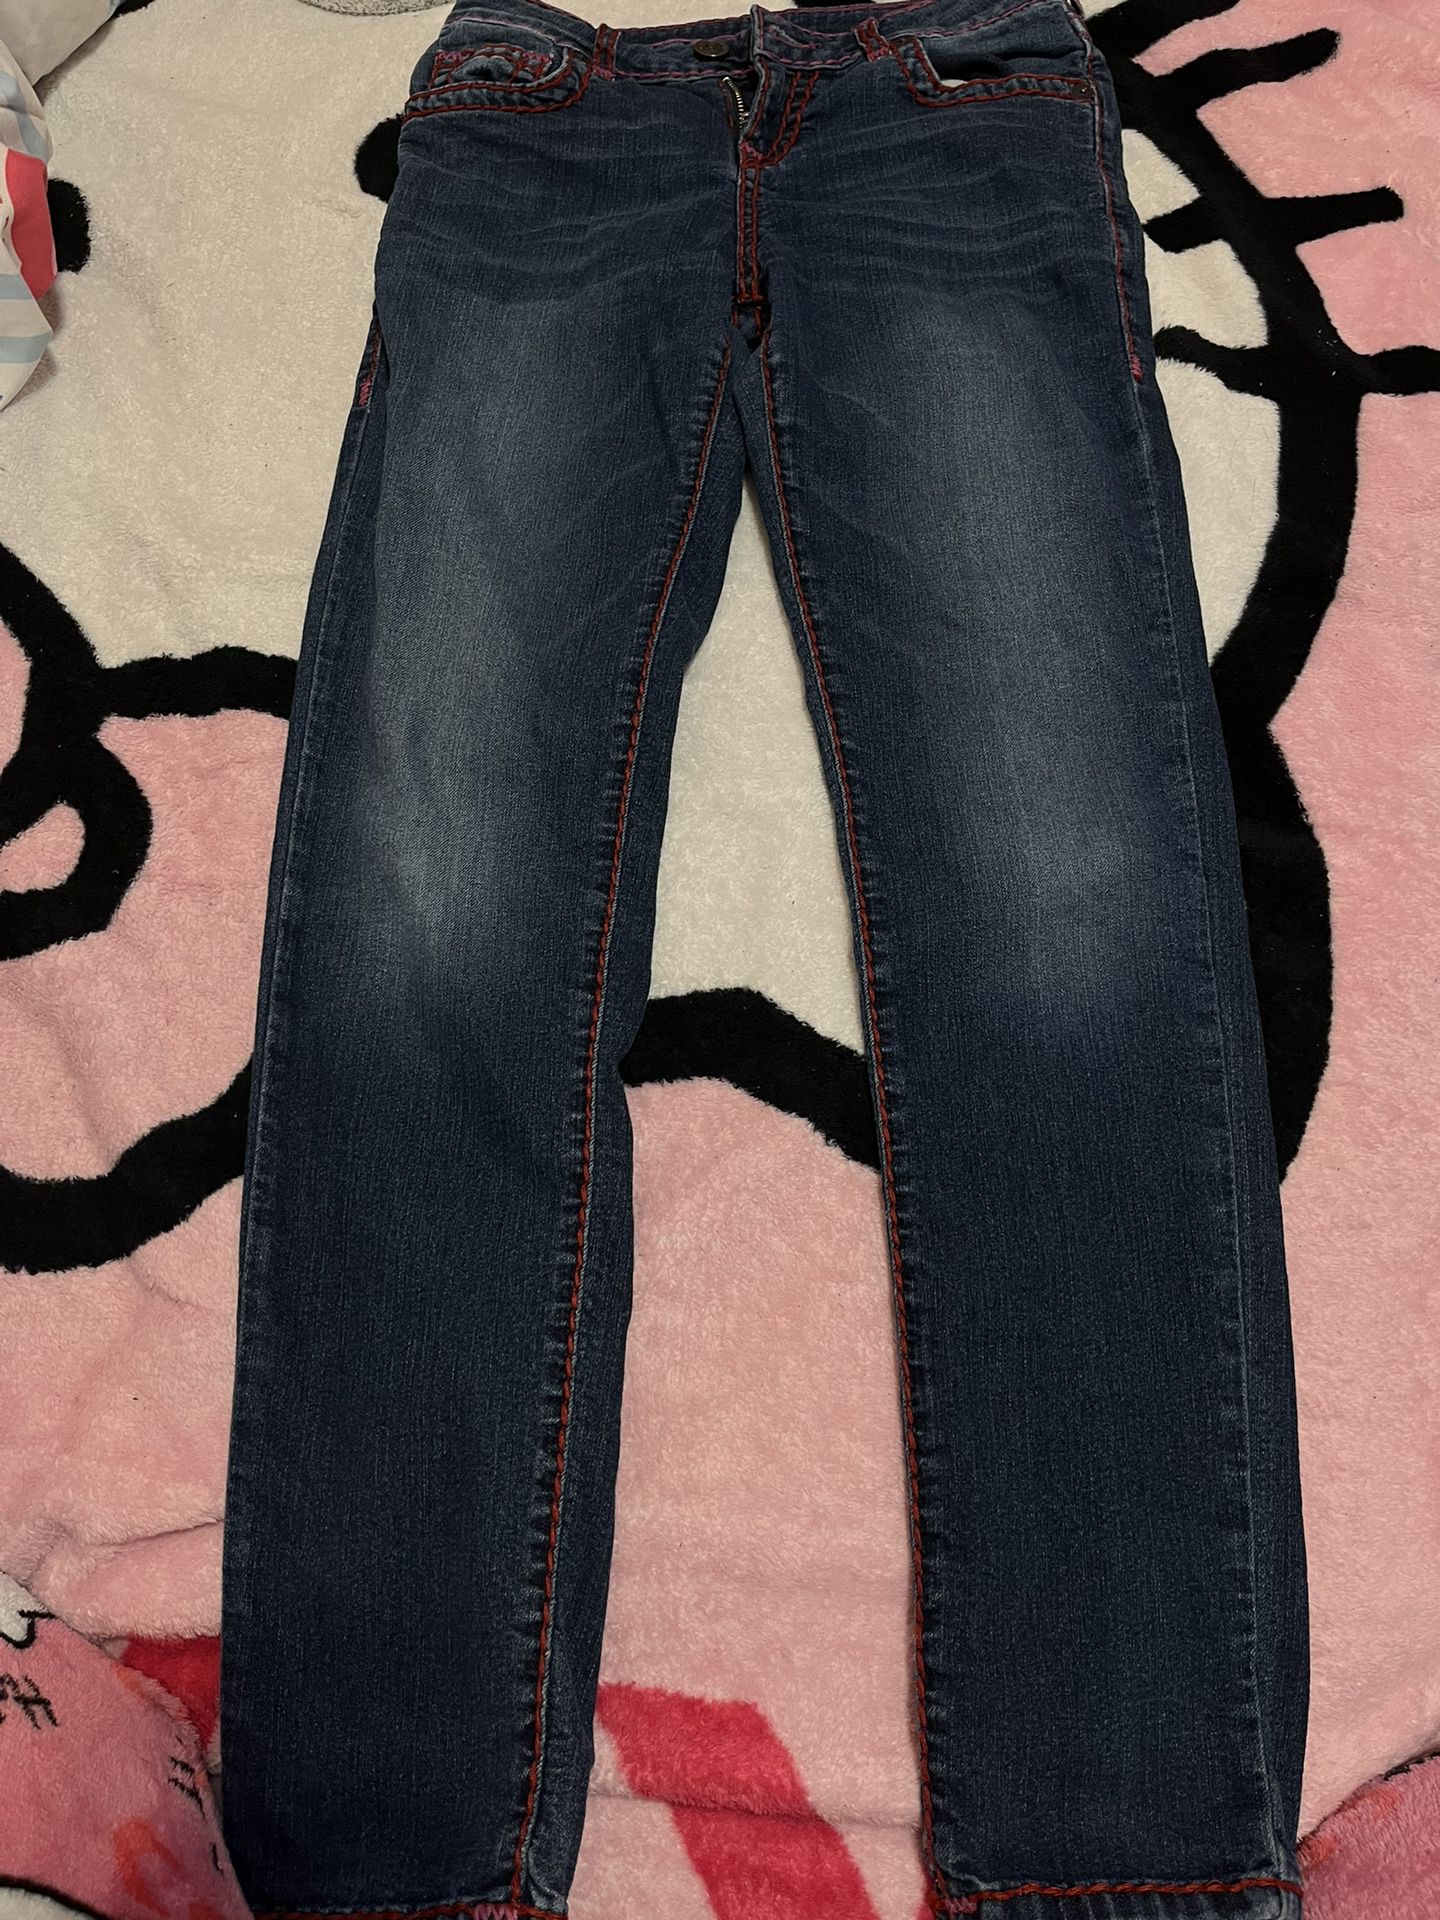 true religion outlined jeans size 14 